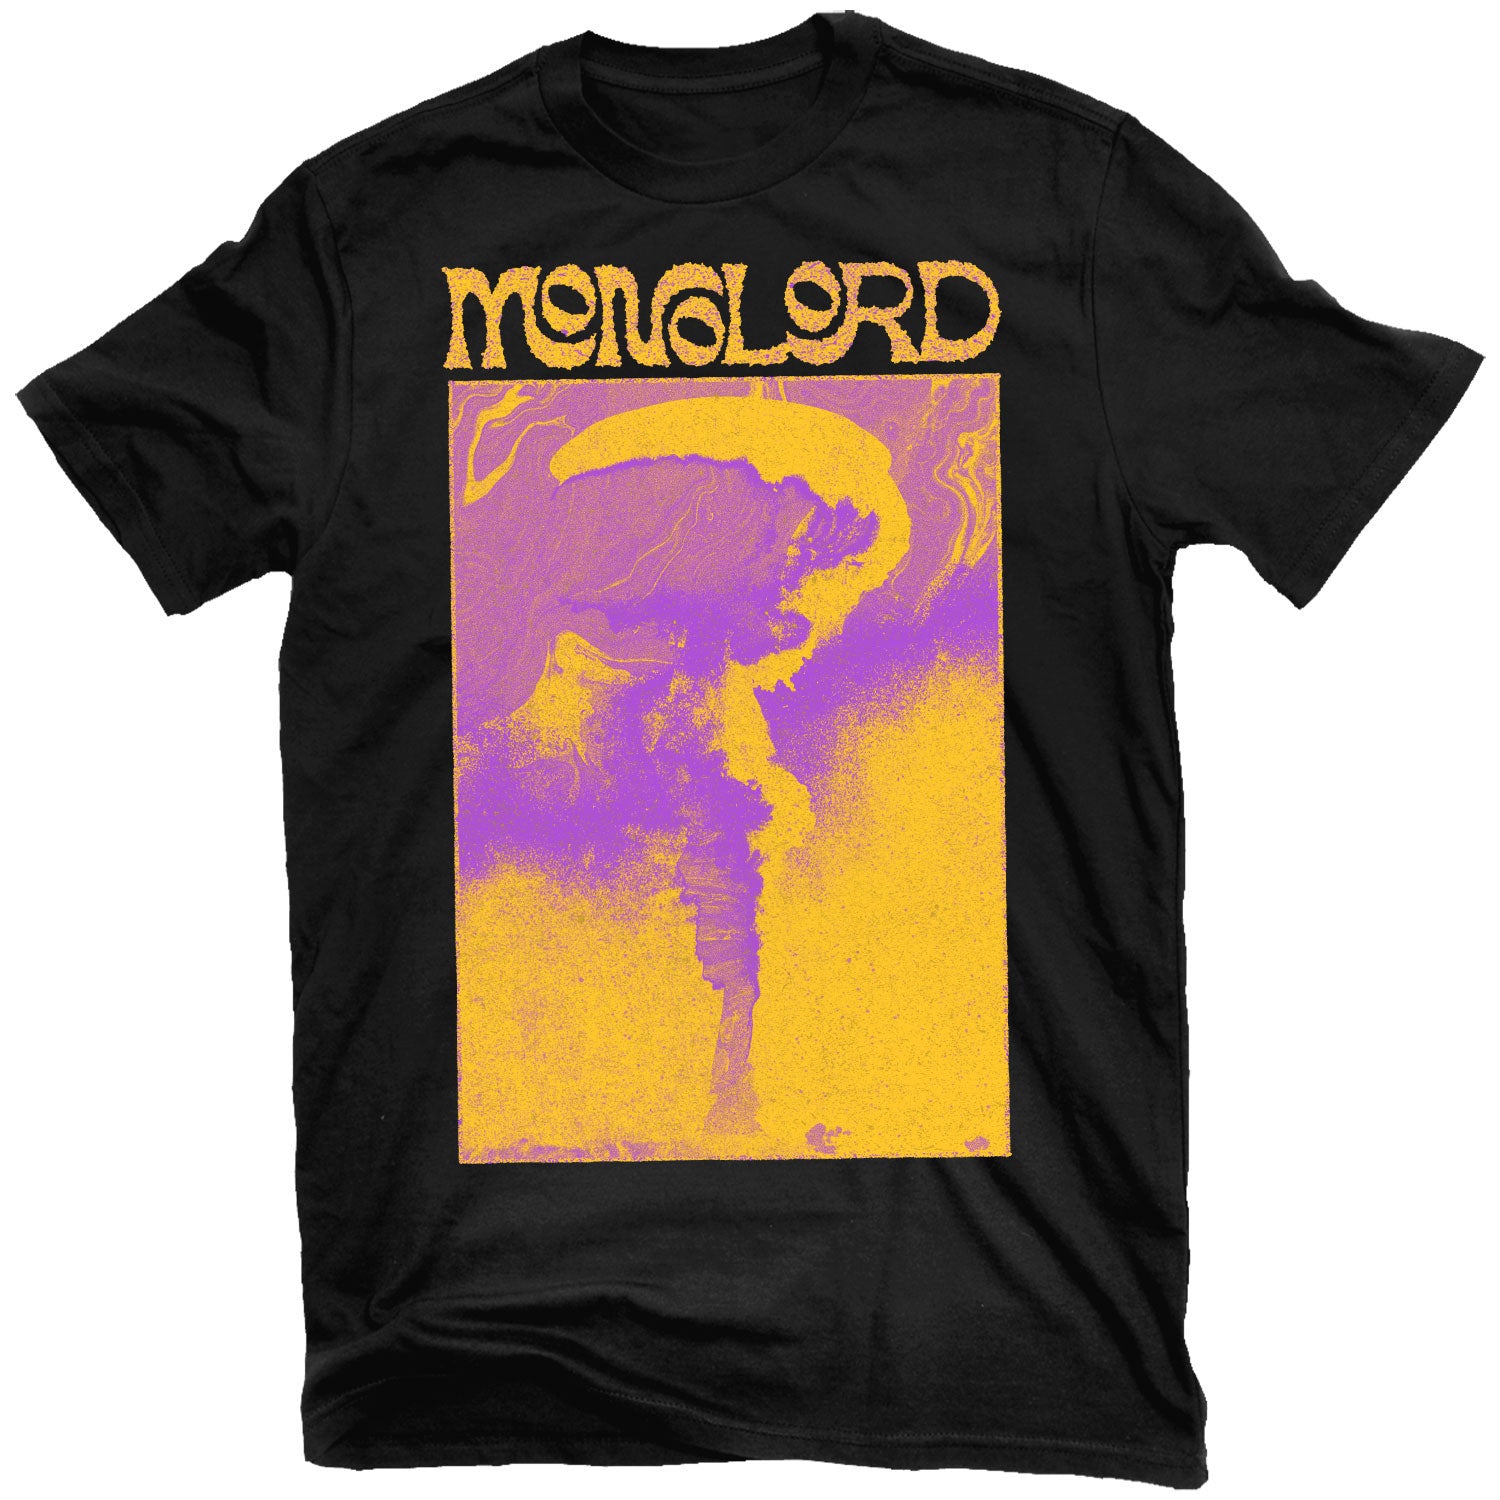 Monolord "It's All The Same" T-Shirt